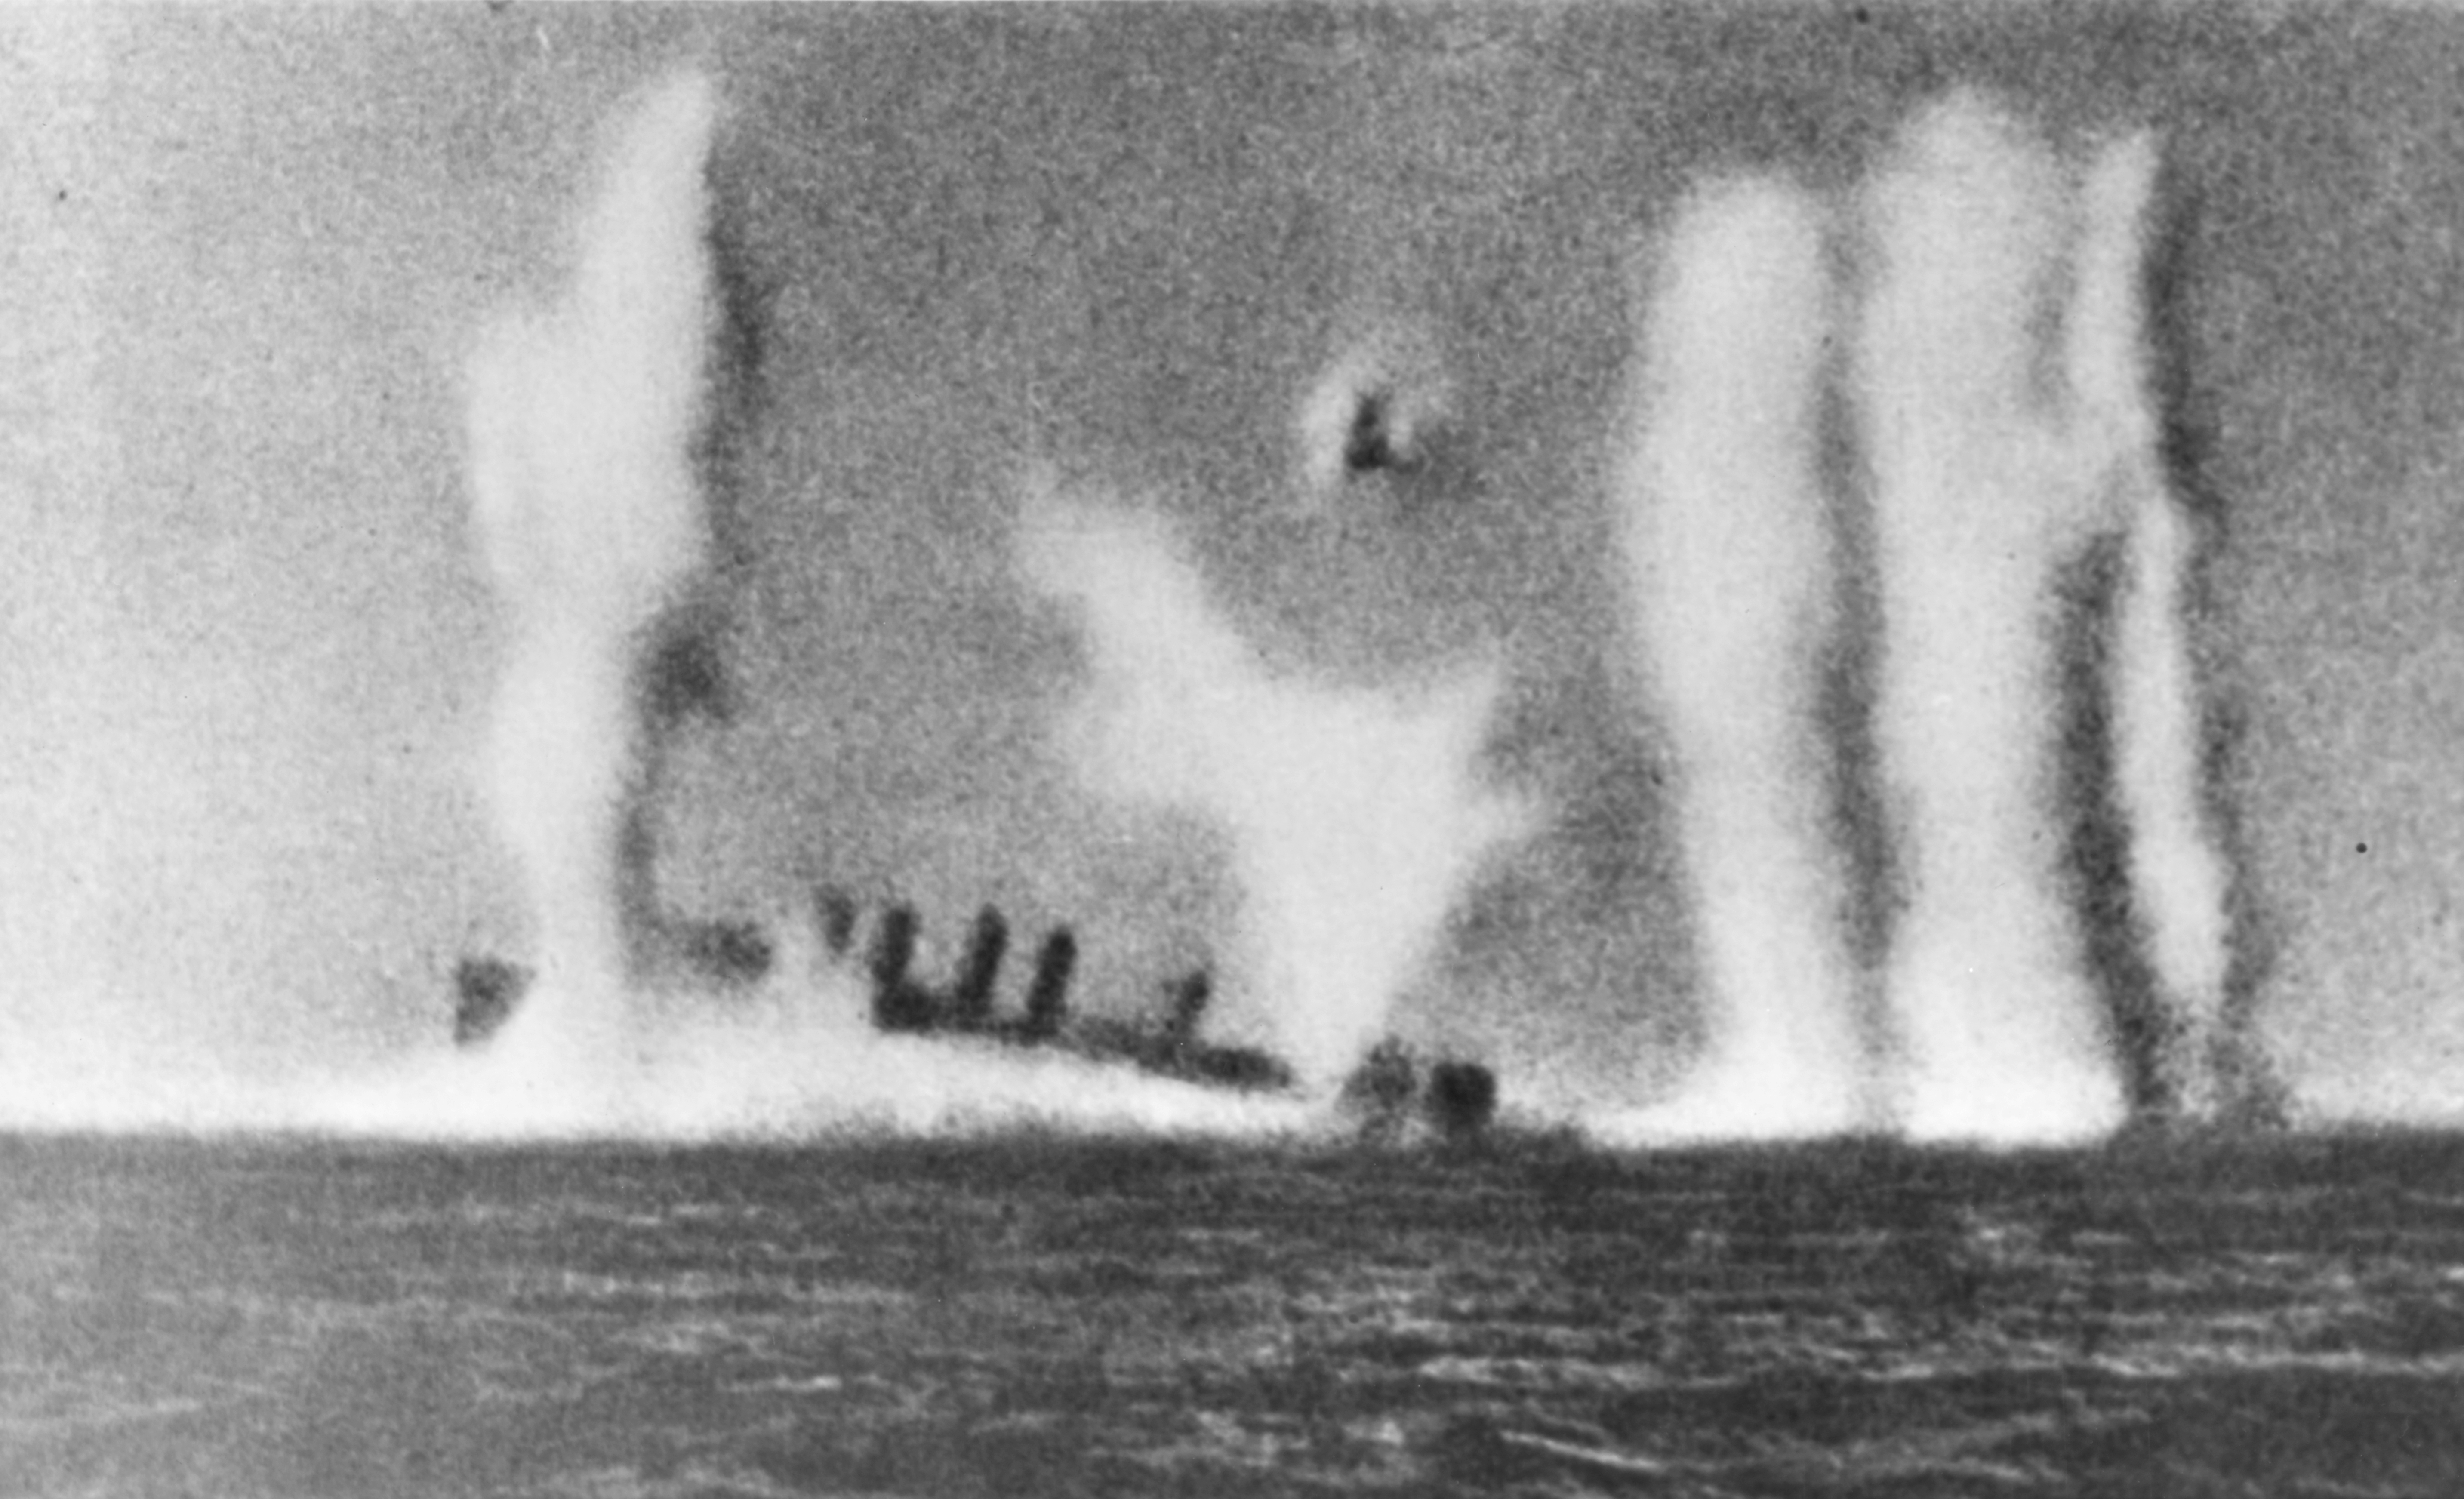 “HMS POPE” actually the USS Edsall being sunk by gunfire